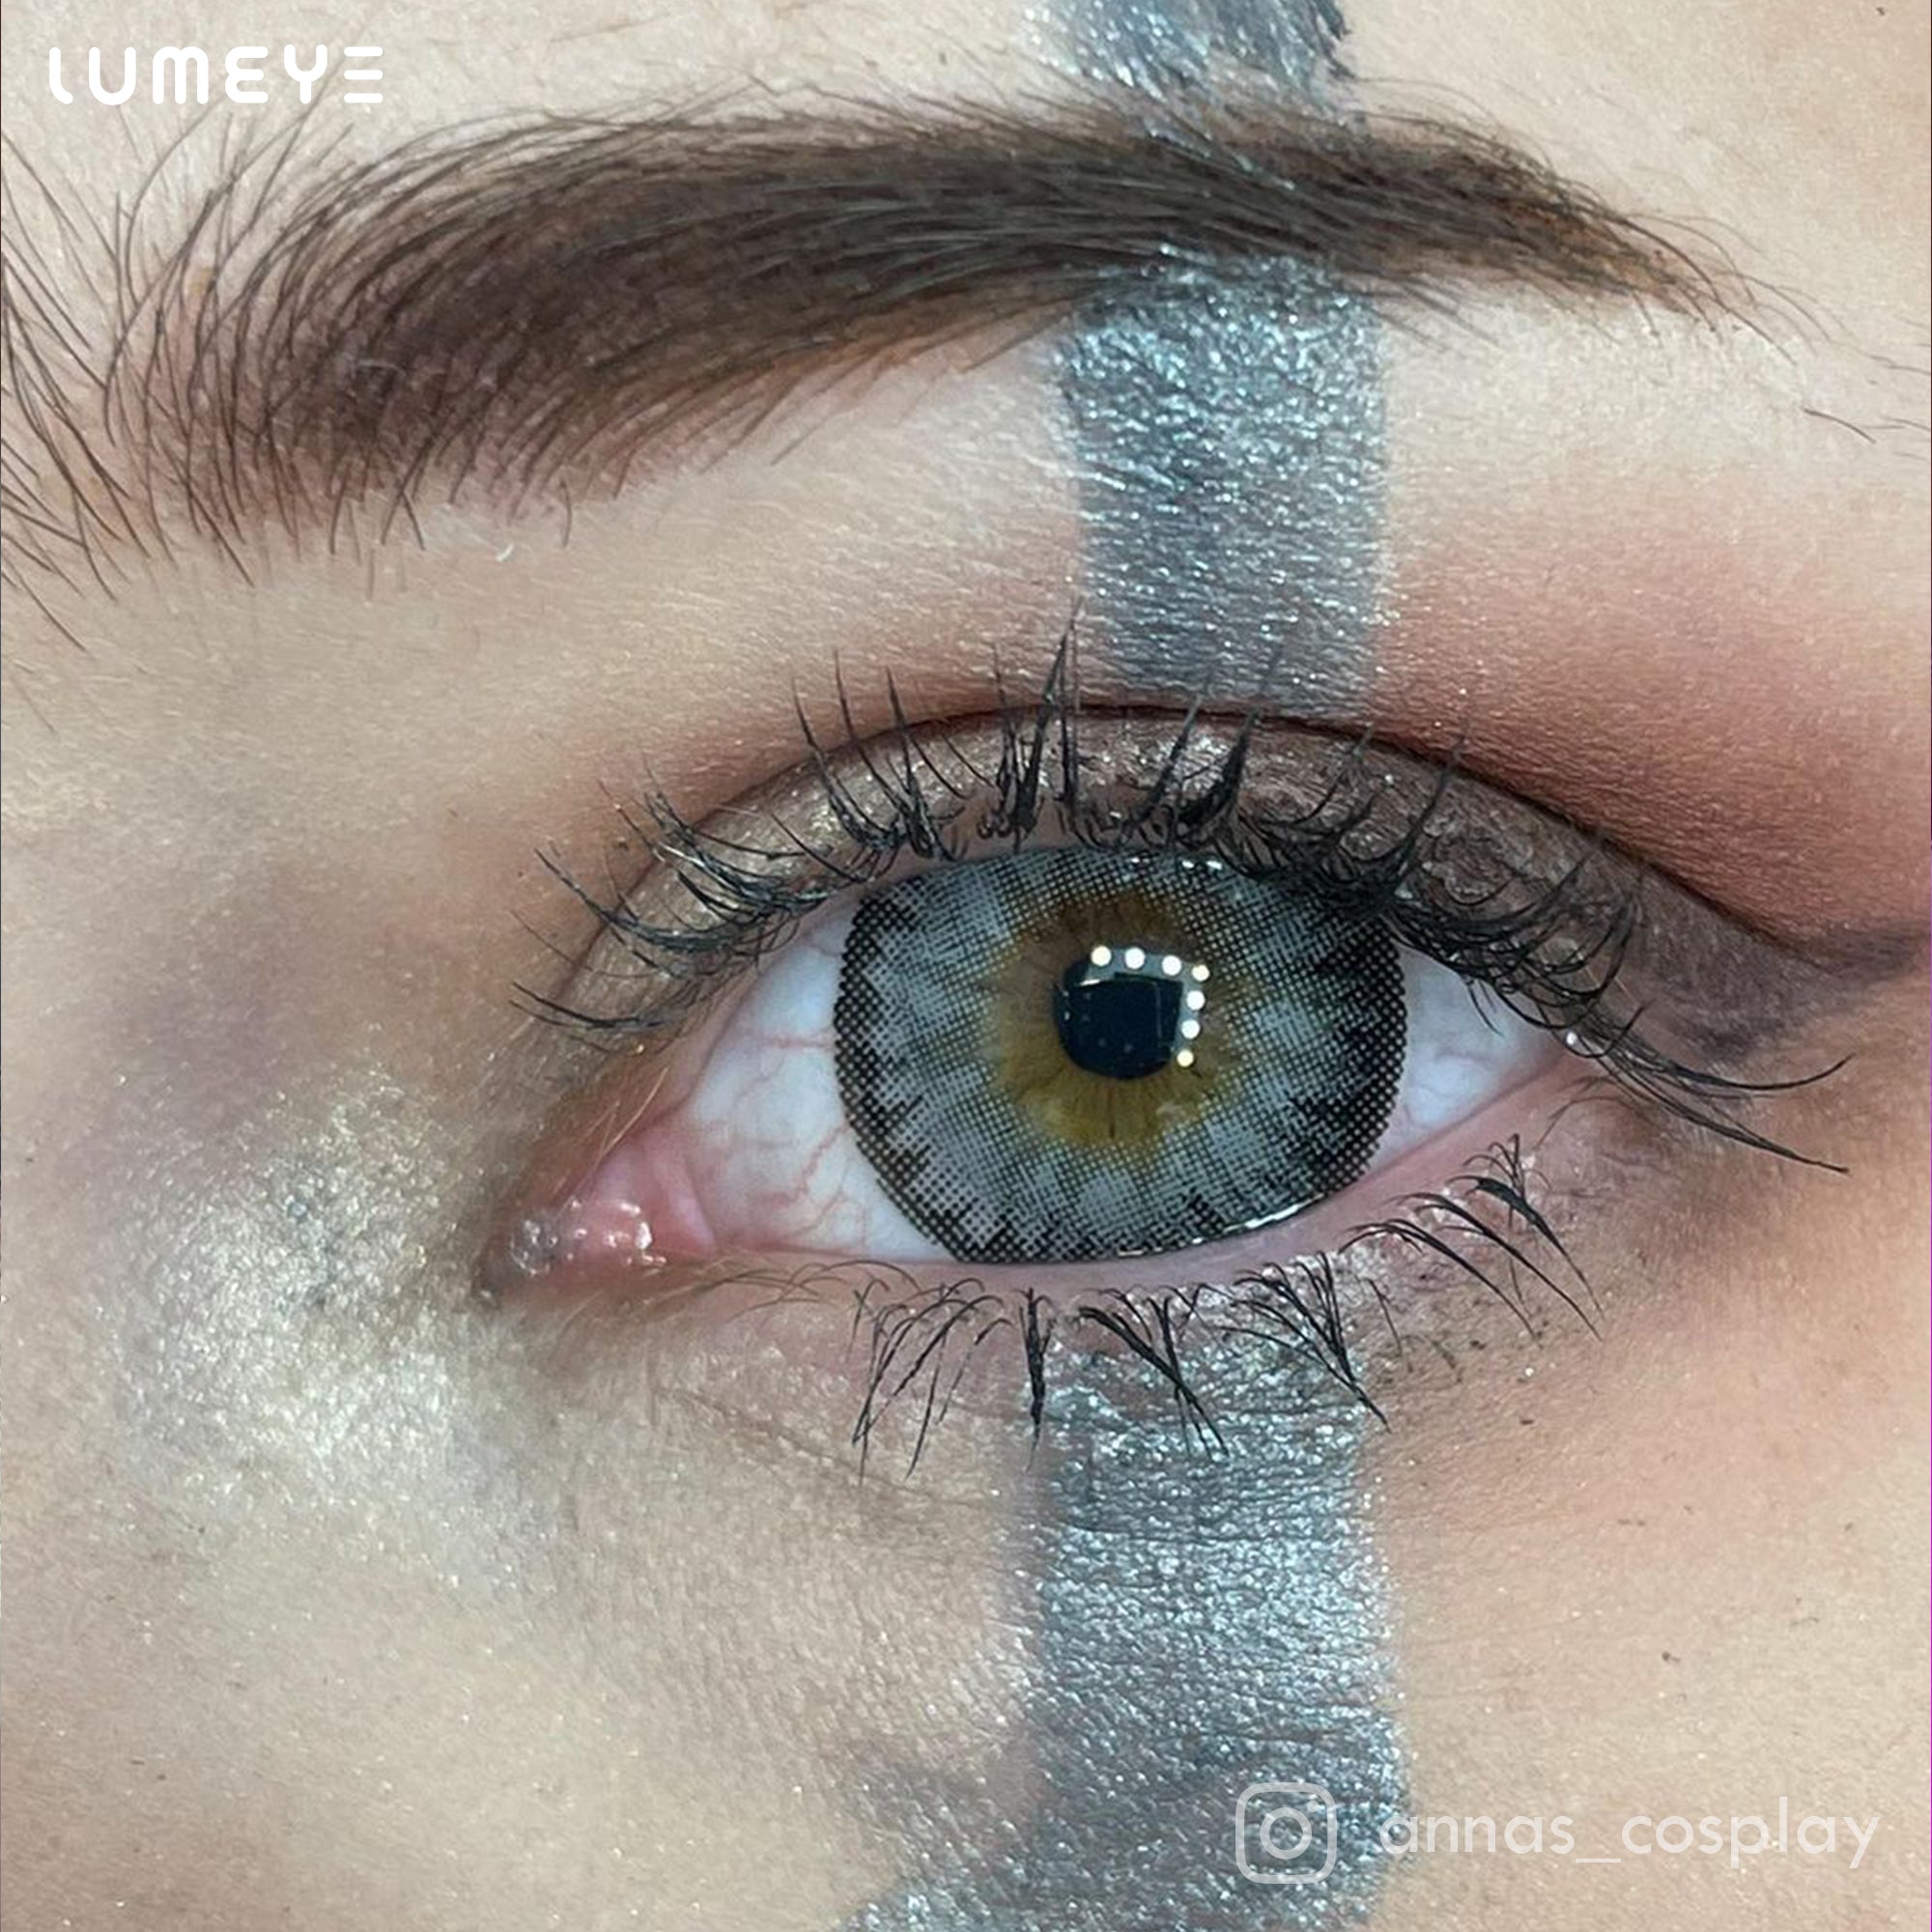 Best COLORED CONTACTS - LUMEYE Tequila Gray Colored Contact Lenses - LUMEYE